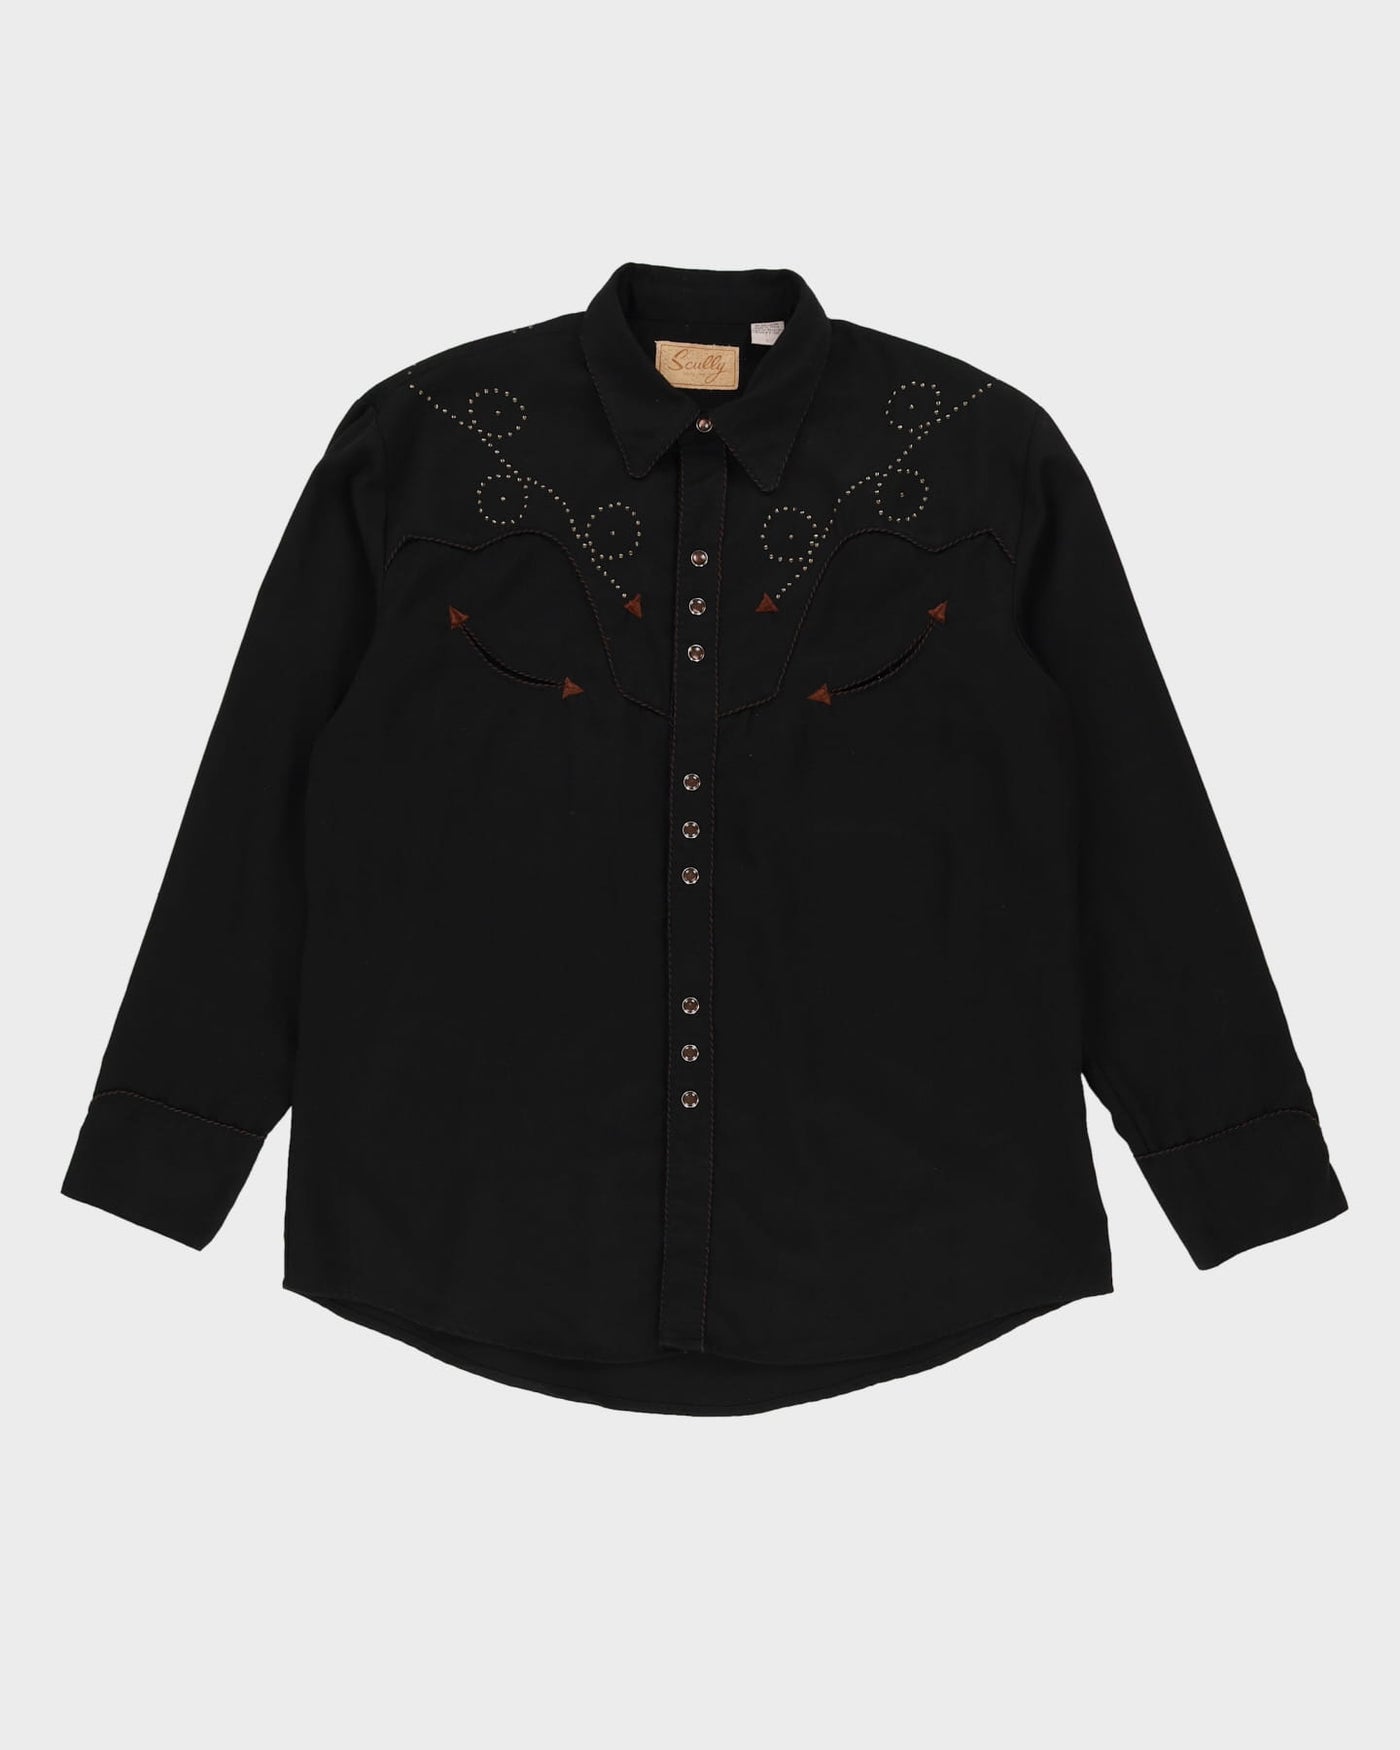 Vintage 90s Scully Black Long-Sleeve Western Shirt - L